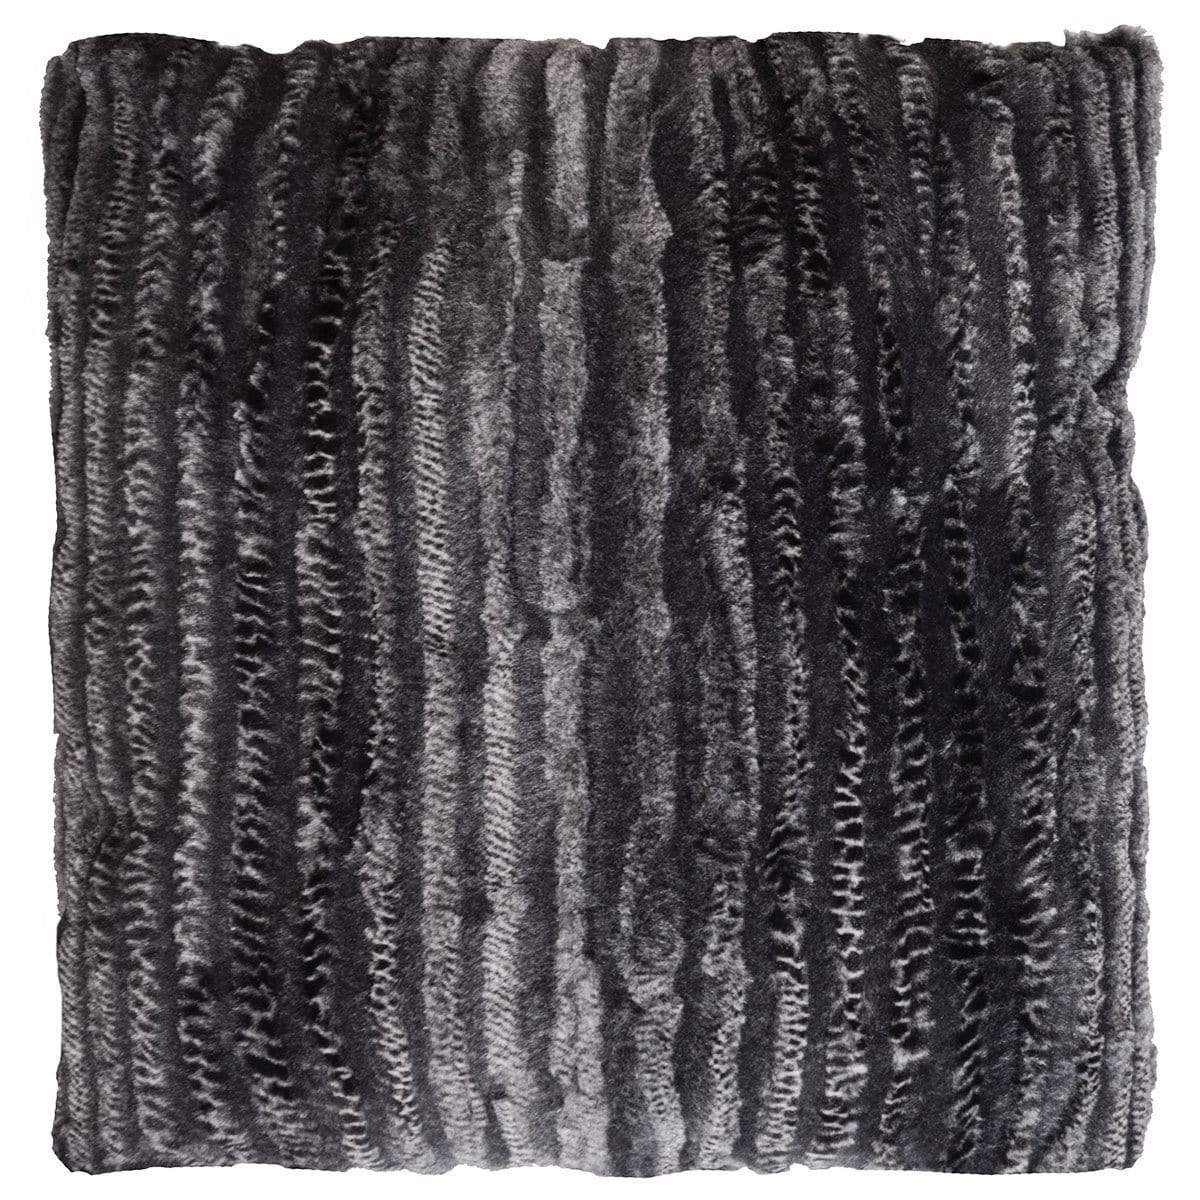 Pillow Shams in rattle &#39;n&#39; Shake; snake print black and gray | Luxury Faux Fur decorative pillow | Handmade by Pandemonium Millinery